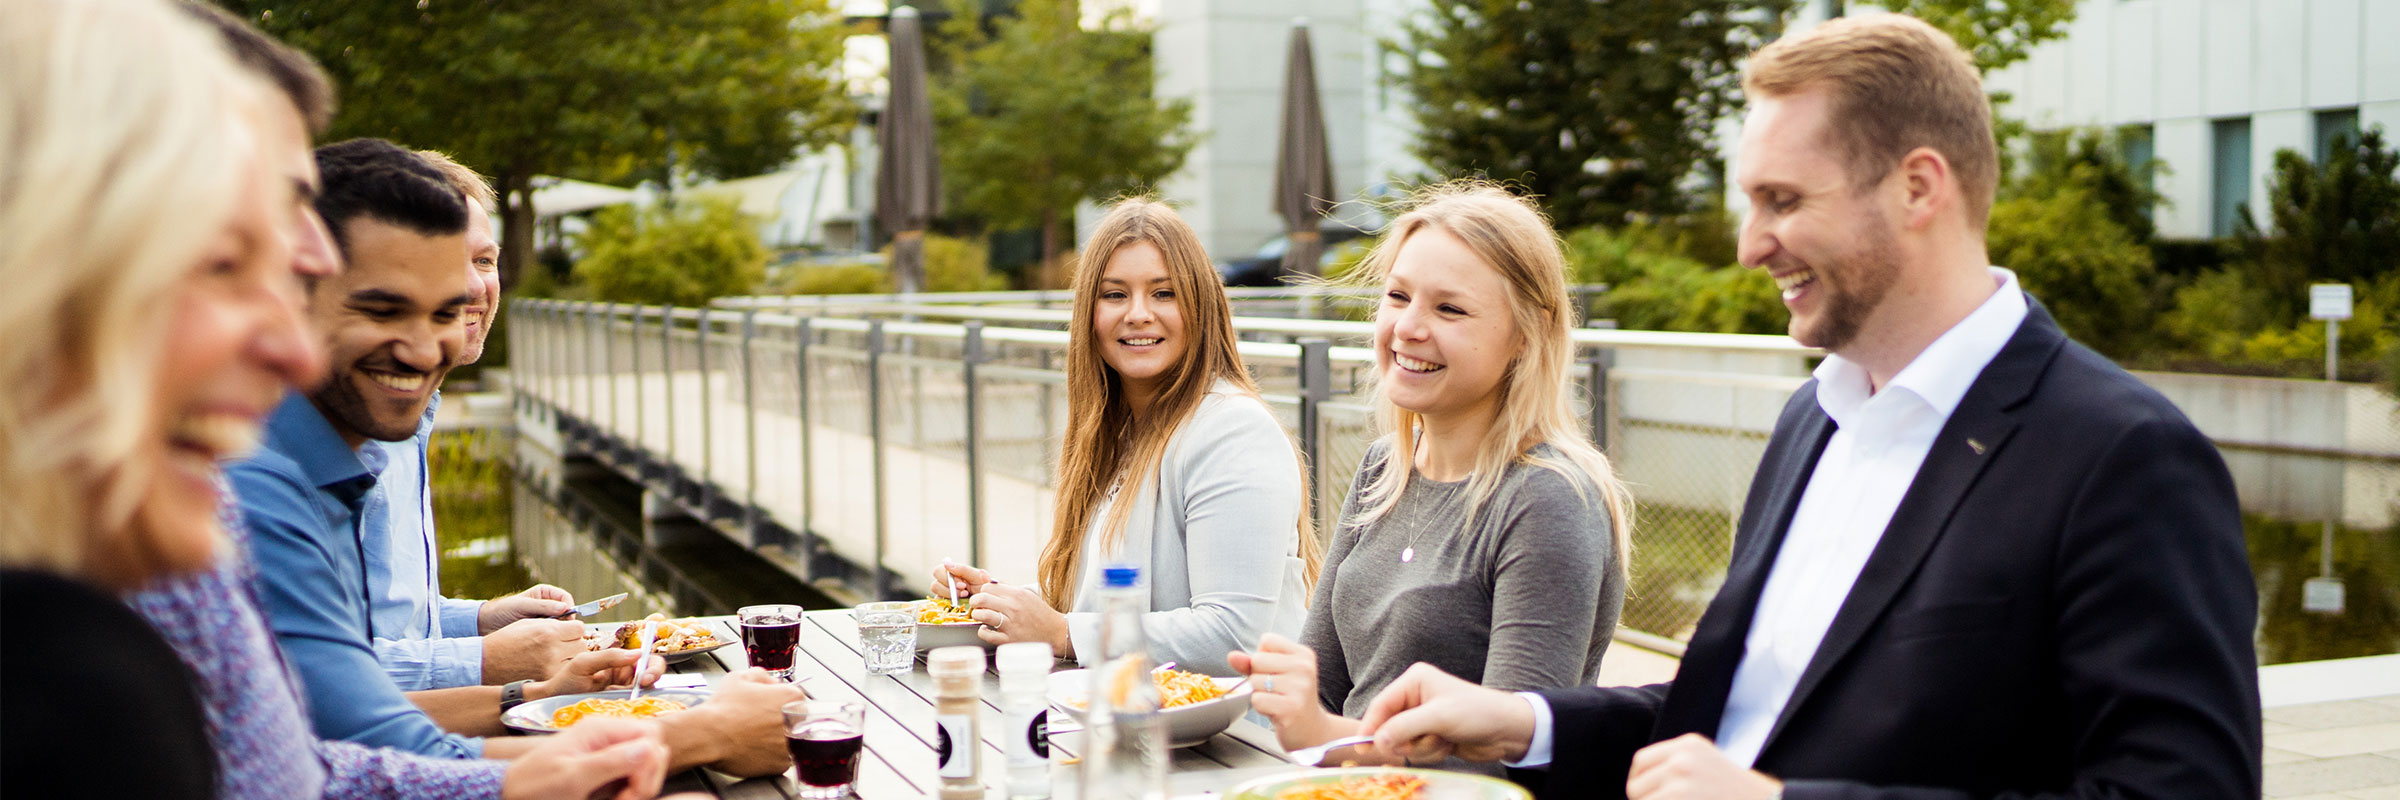 Employees sit together on the terrace and enjoy the fresh lunch offer at the Business Campus Unterschleißheim